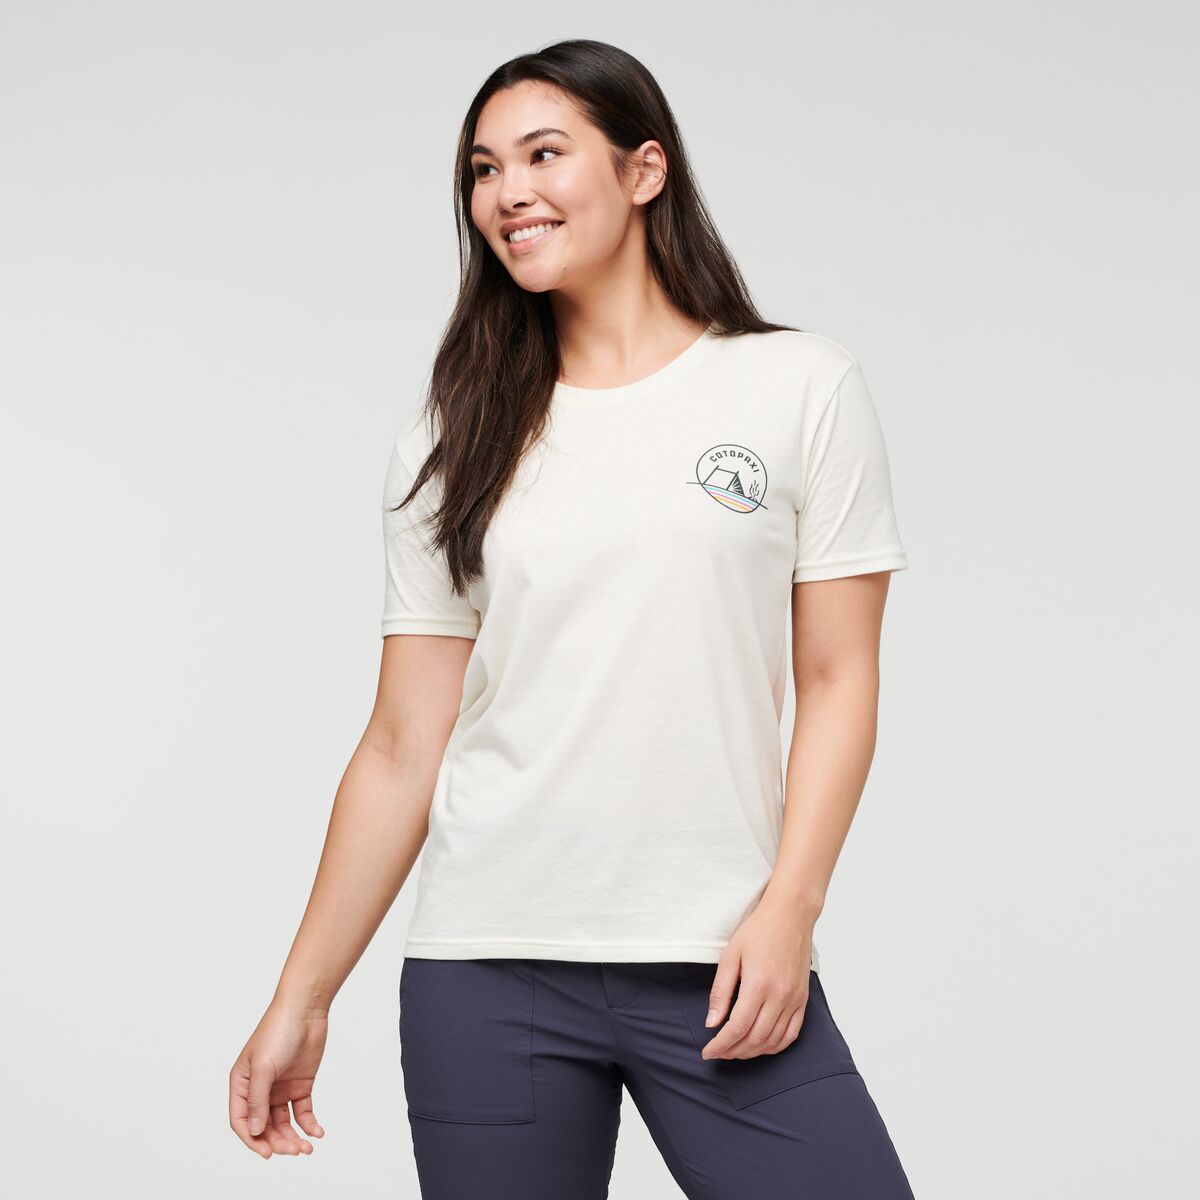 Cotopaxi - W's Camp Life T-shirt - Organic Cotton & Recycled polyester - Weekendbee - sustainable sportswear